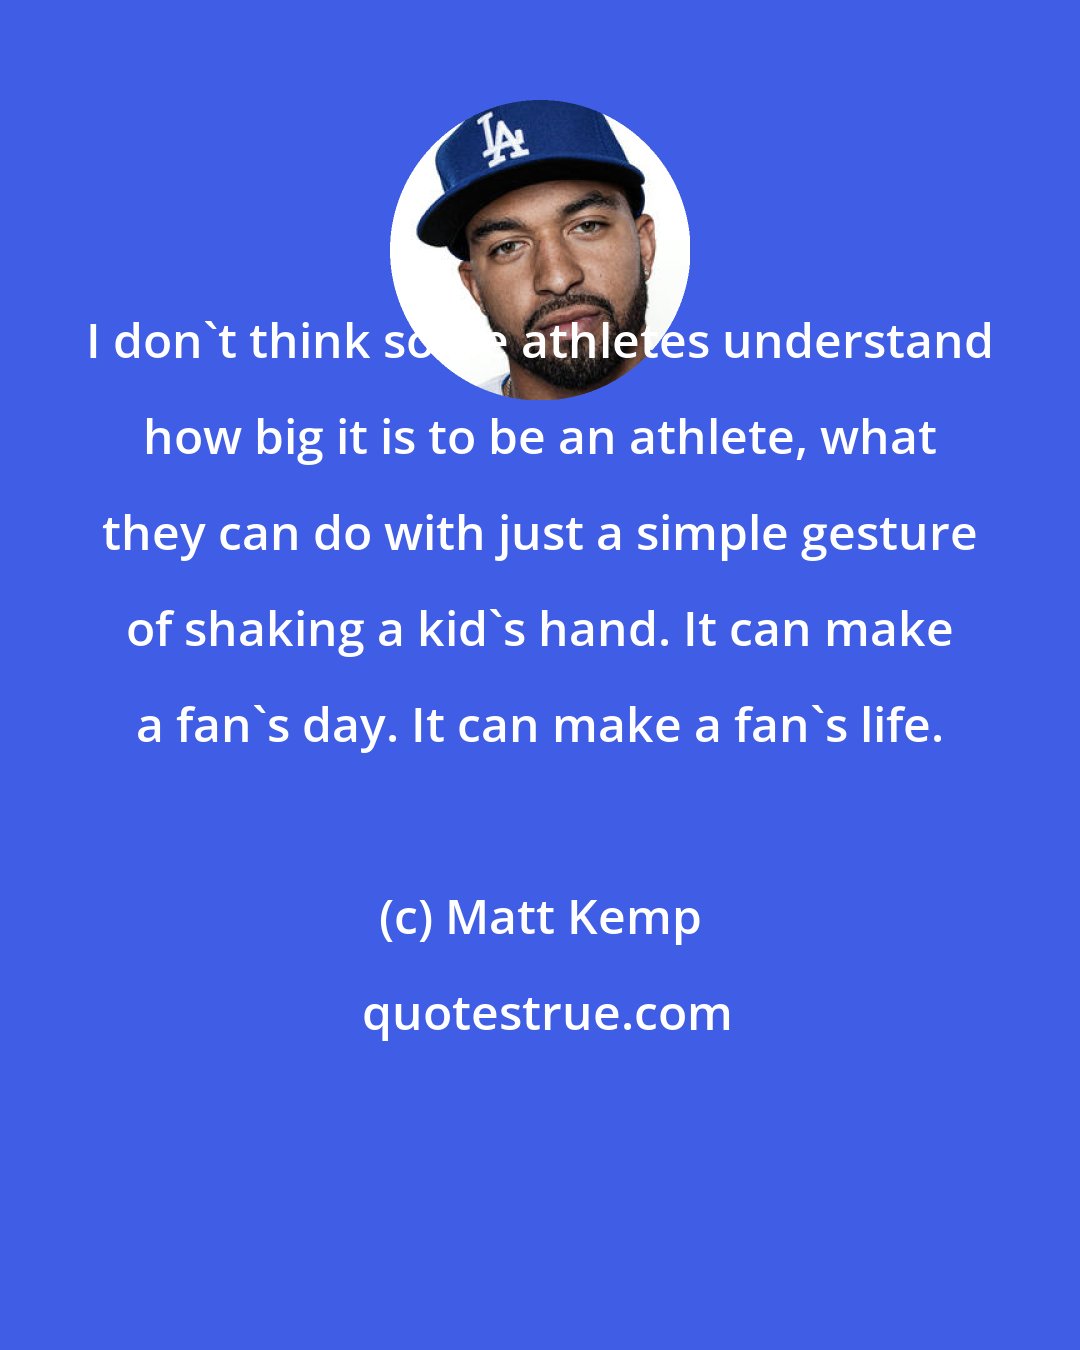 Matt Kemp: I don't think some athletes understand how big it is to be an athlete, what they can do with just a simple gesture of shaking a kid's hand. It can make a fan's day. It can make a fan's life.